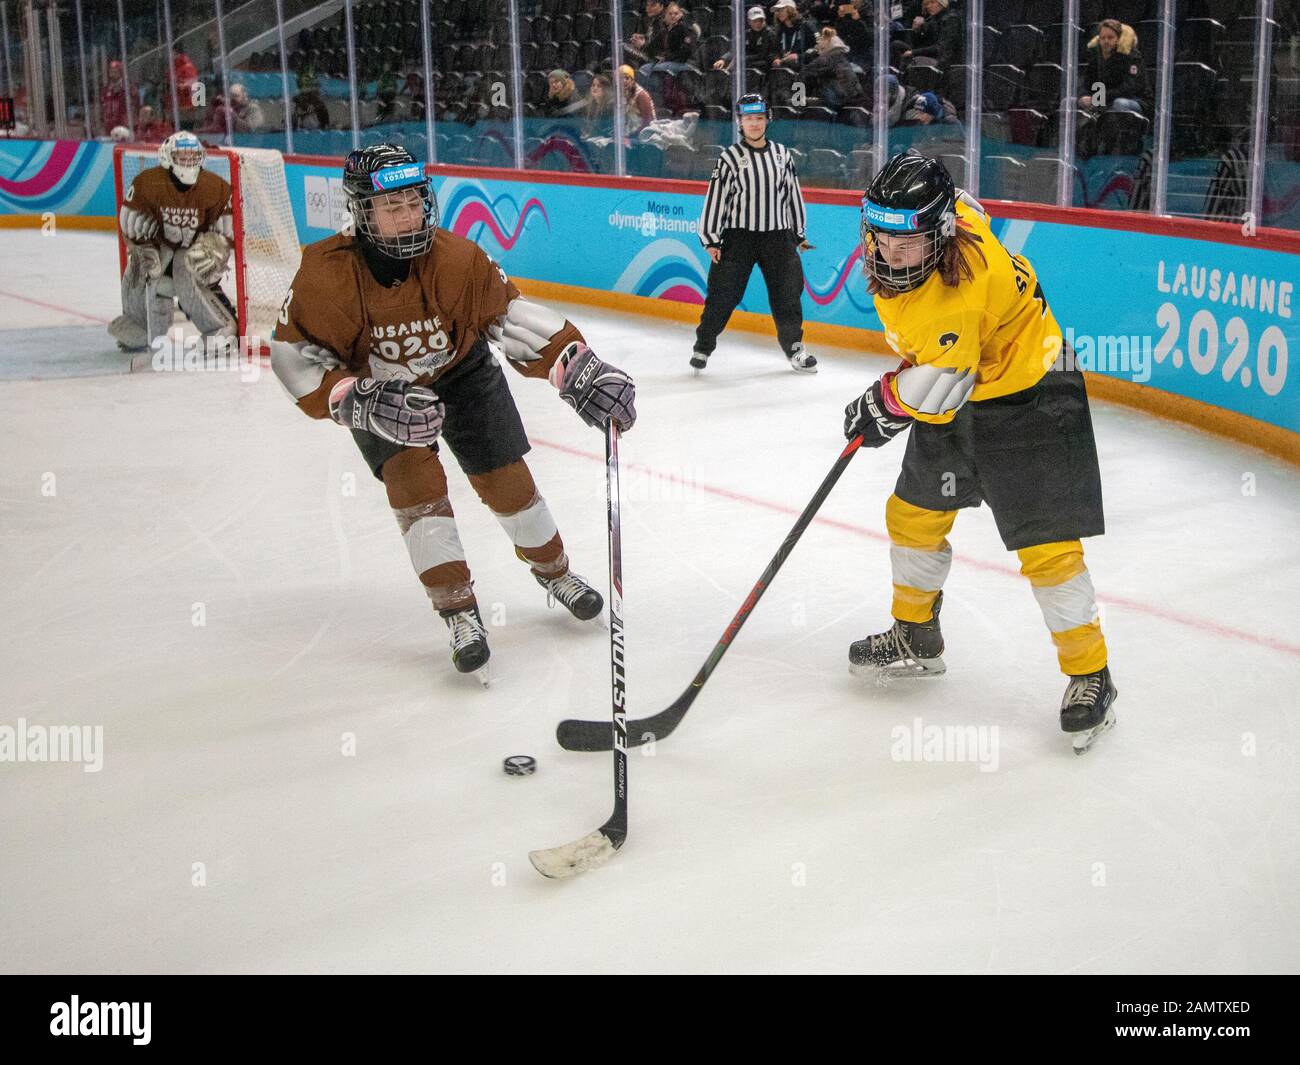 Lausanne, Switzerland. 13th Jan, 2020. Anke Steeno (yellow) and other competitors (brown) in action during the women's mixed NOC 3-on-3 ice hockey preliminary round (game 28; brown v. yellow), during Day 4 of the Lausanne 2020 Winter Youth Olympic Games, at Lausanne Skating Arena. Credit: SOPA Images Limited/Alamy Live News Stock Photo